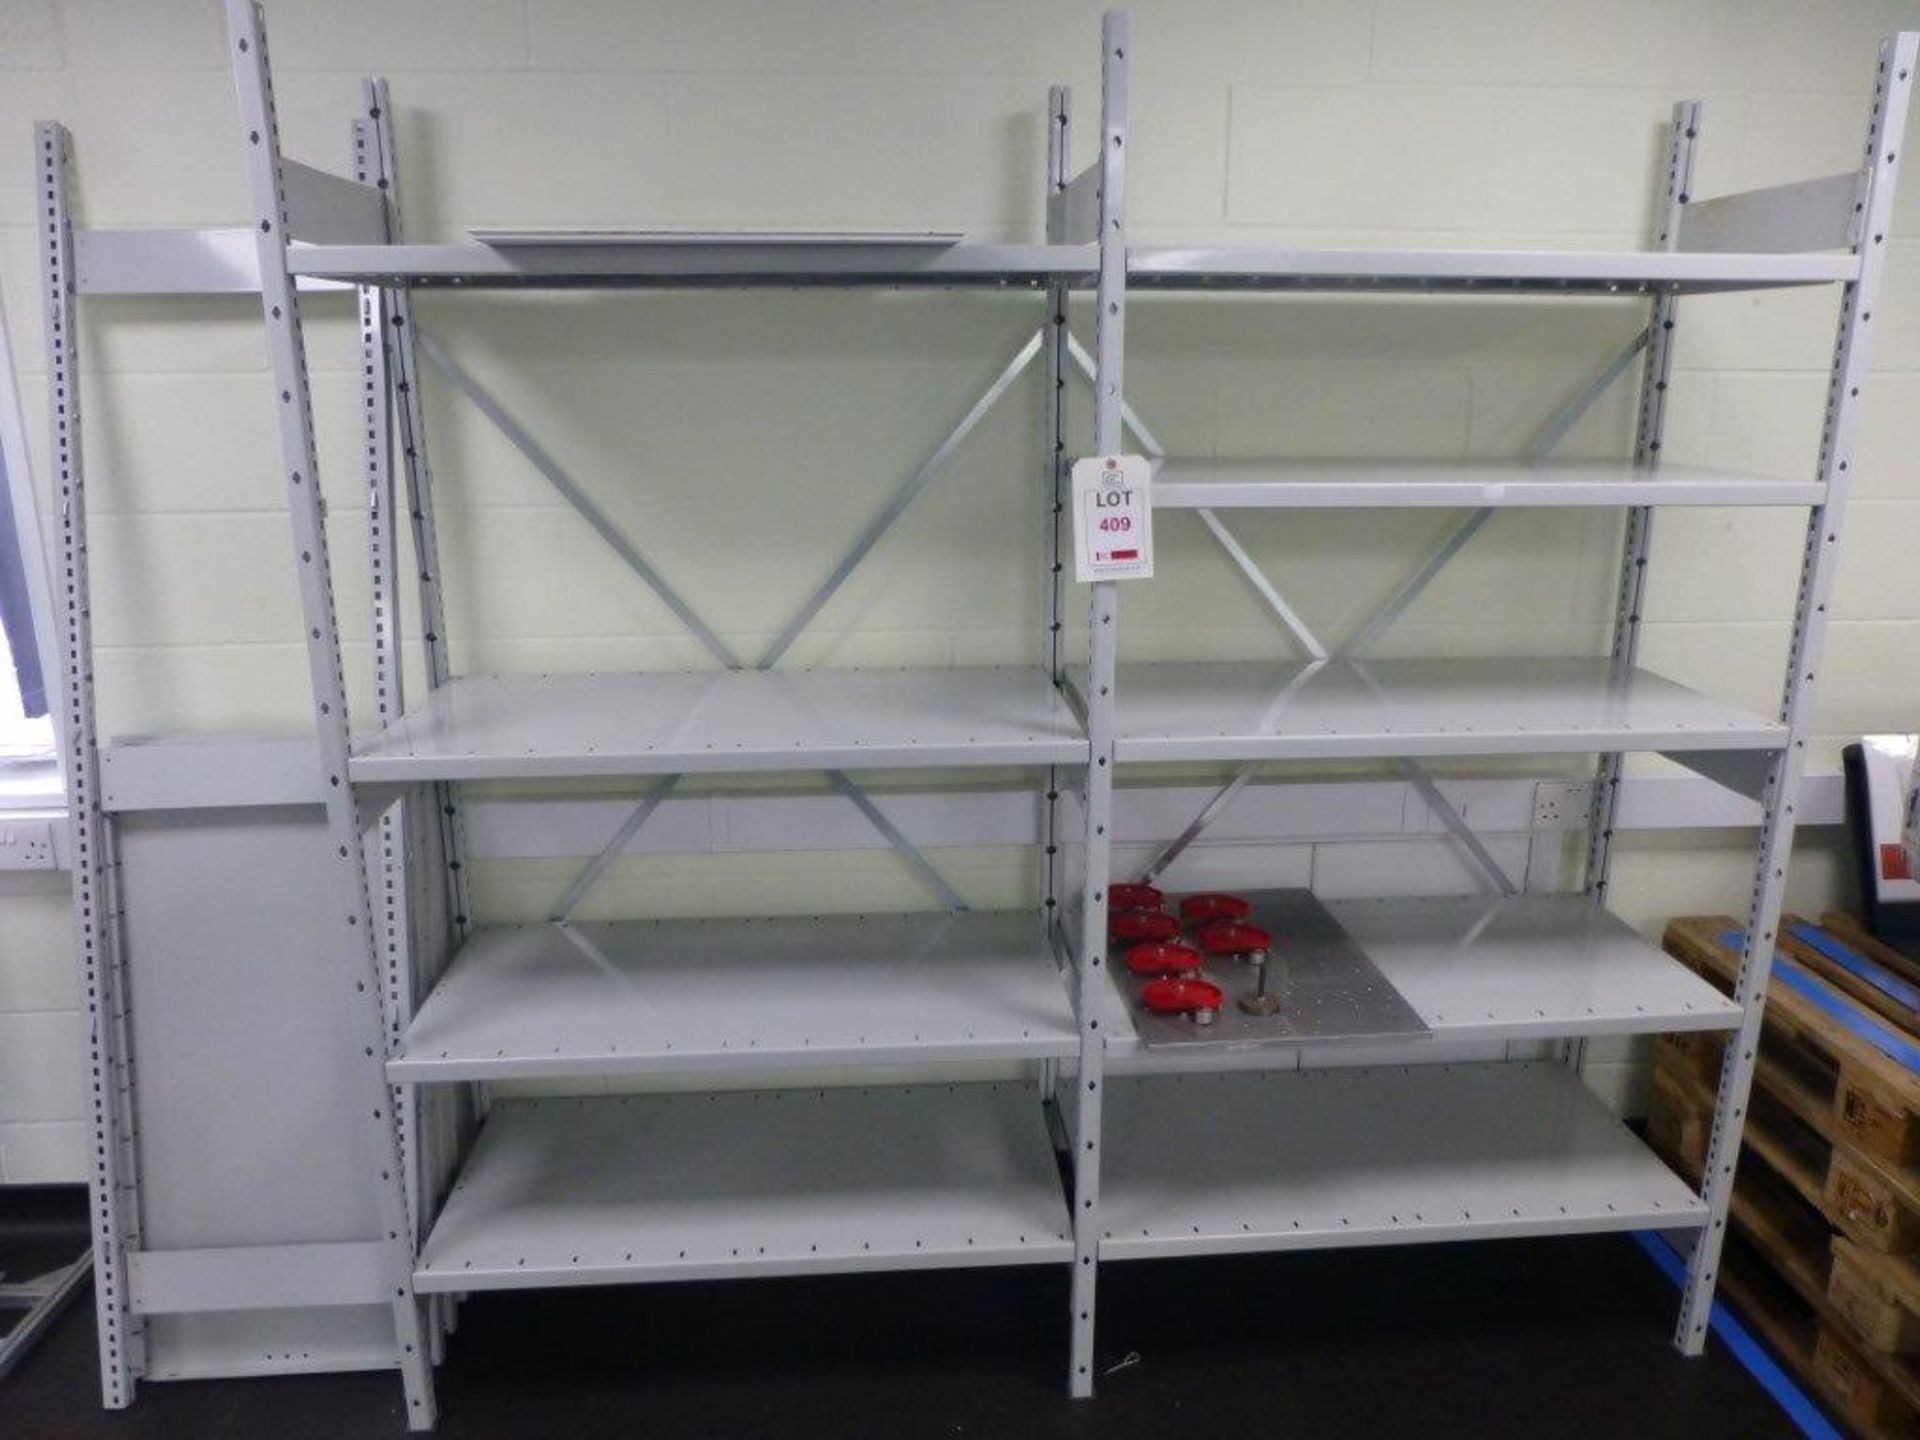 2 bays 5 tier boltless light duty racking, 2100mm x 500mm x 2000mm overall with 6 spare shelves